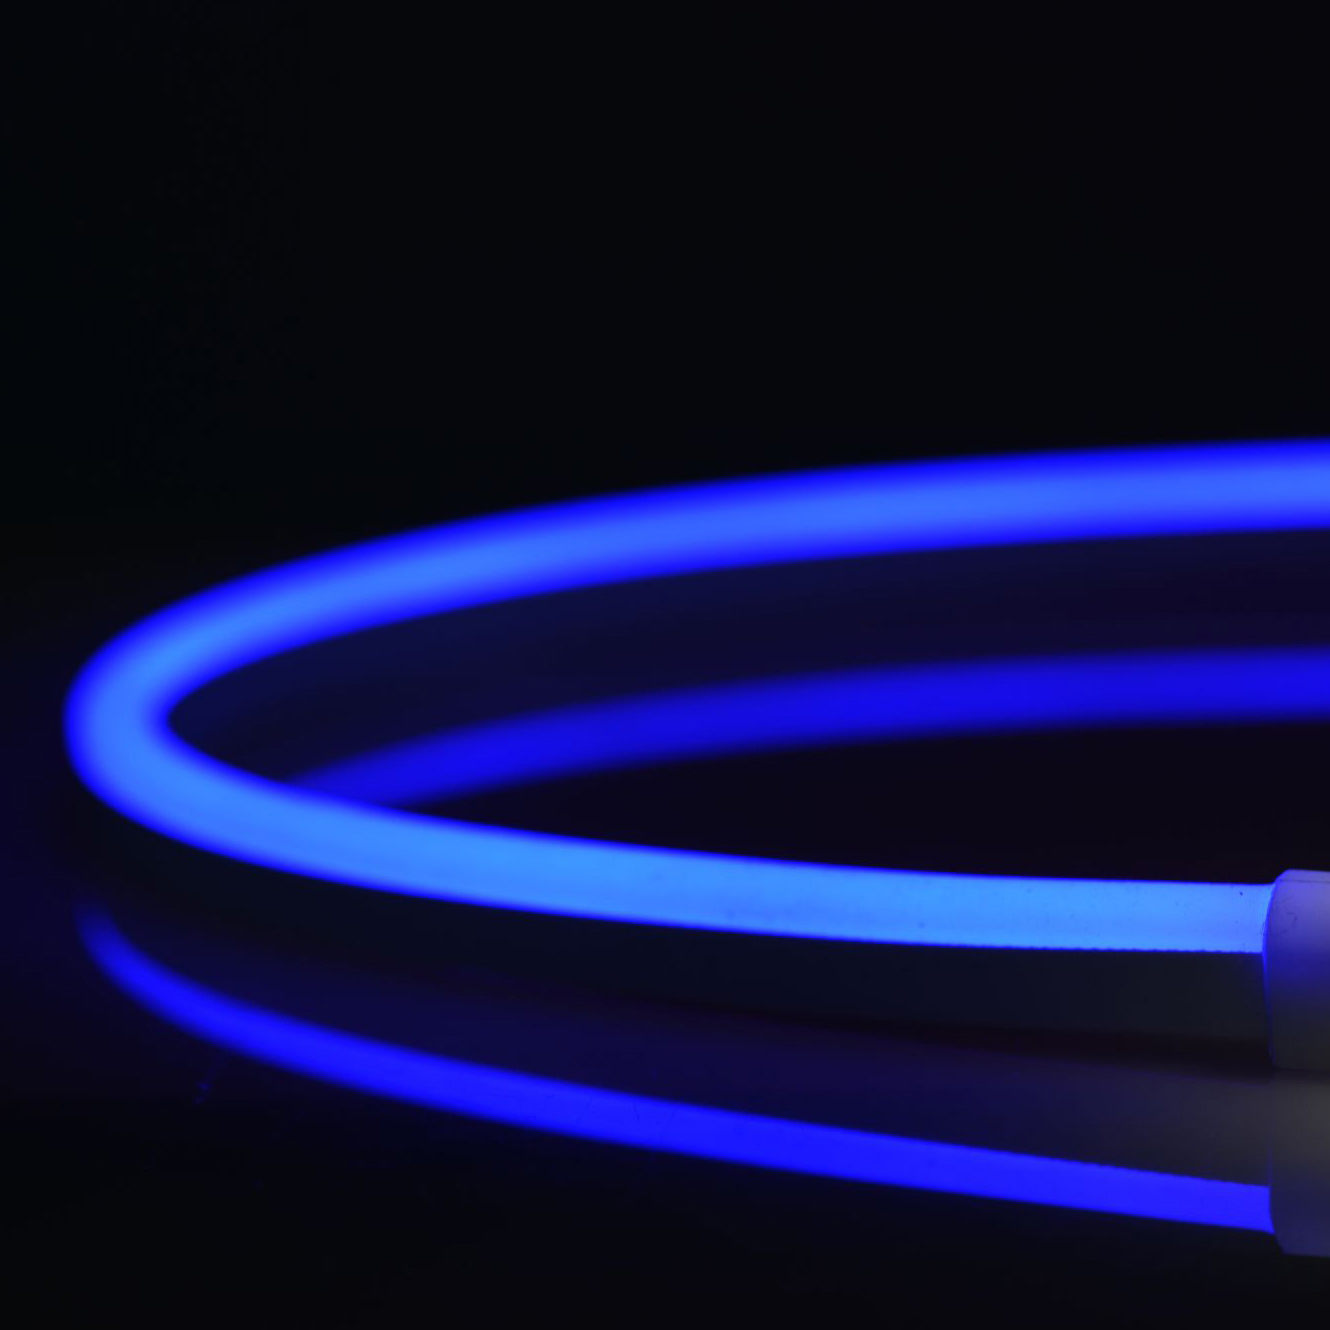 LED Neon Tube Light in 8 Colours with Stand and Wall Clips